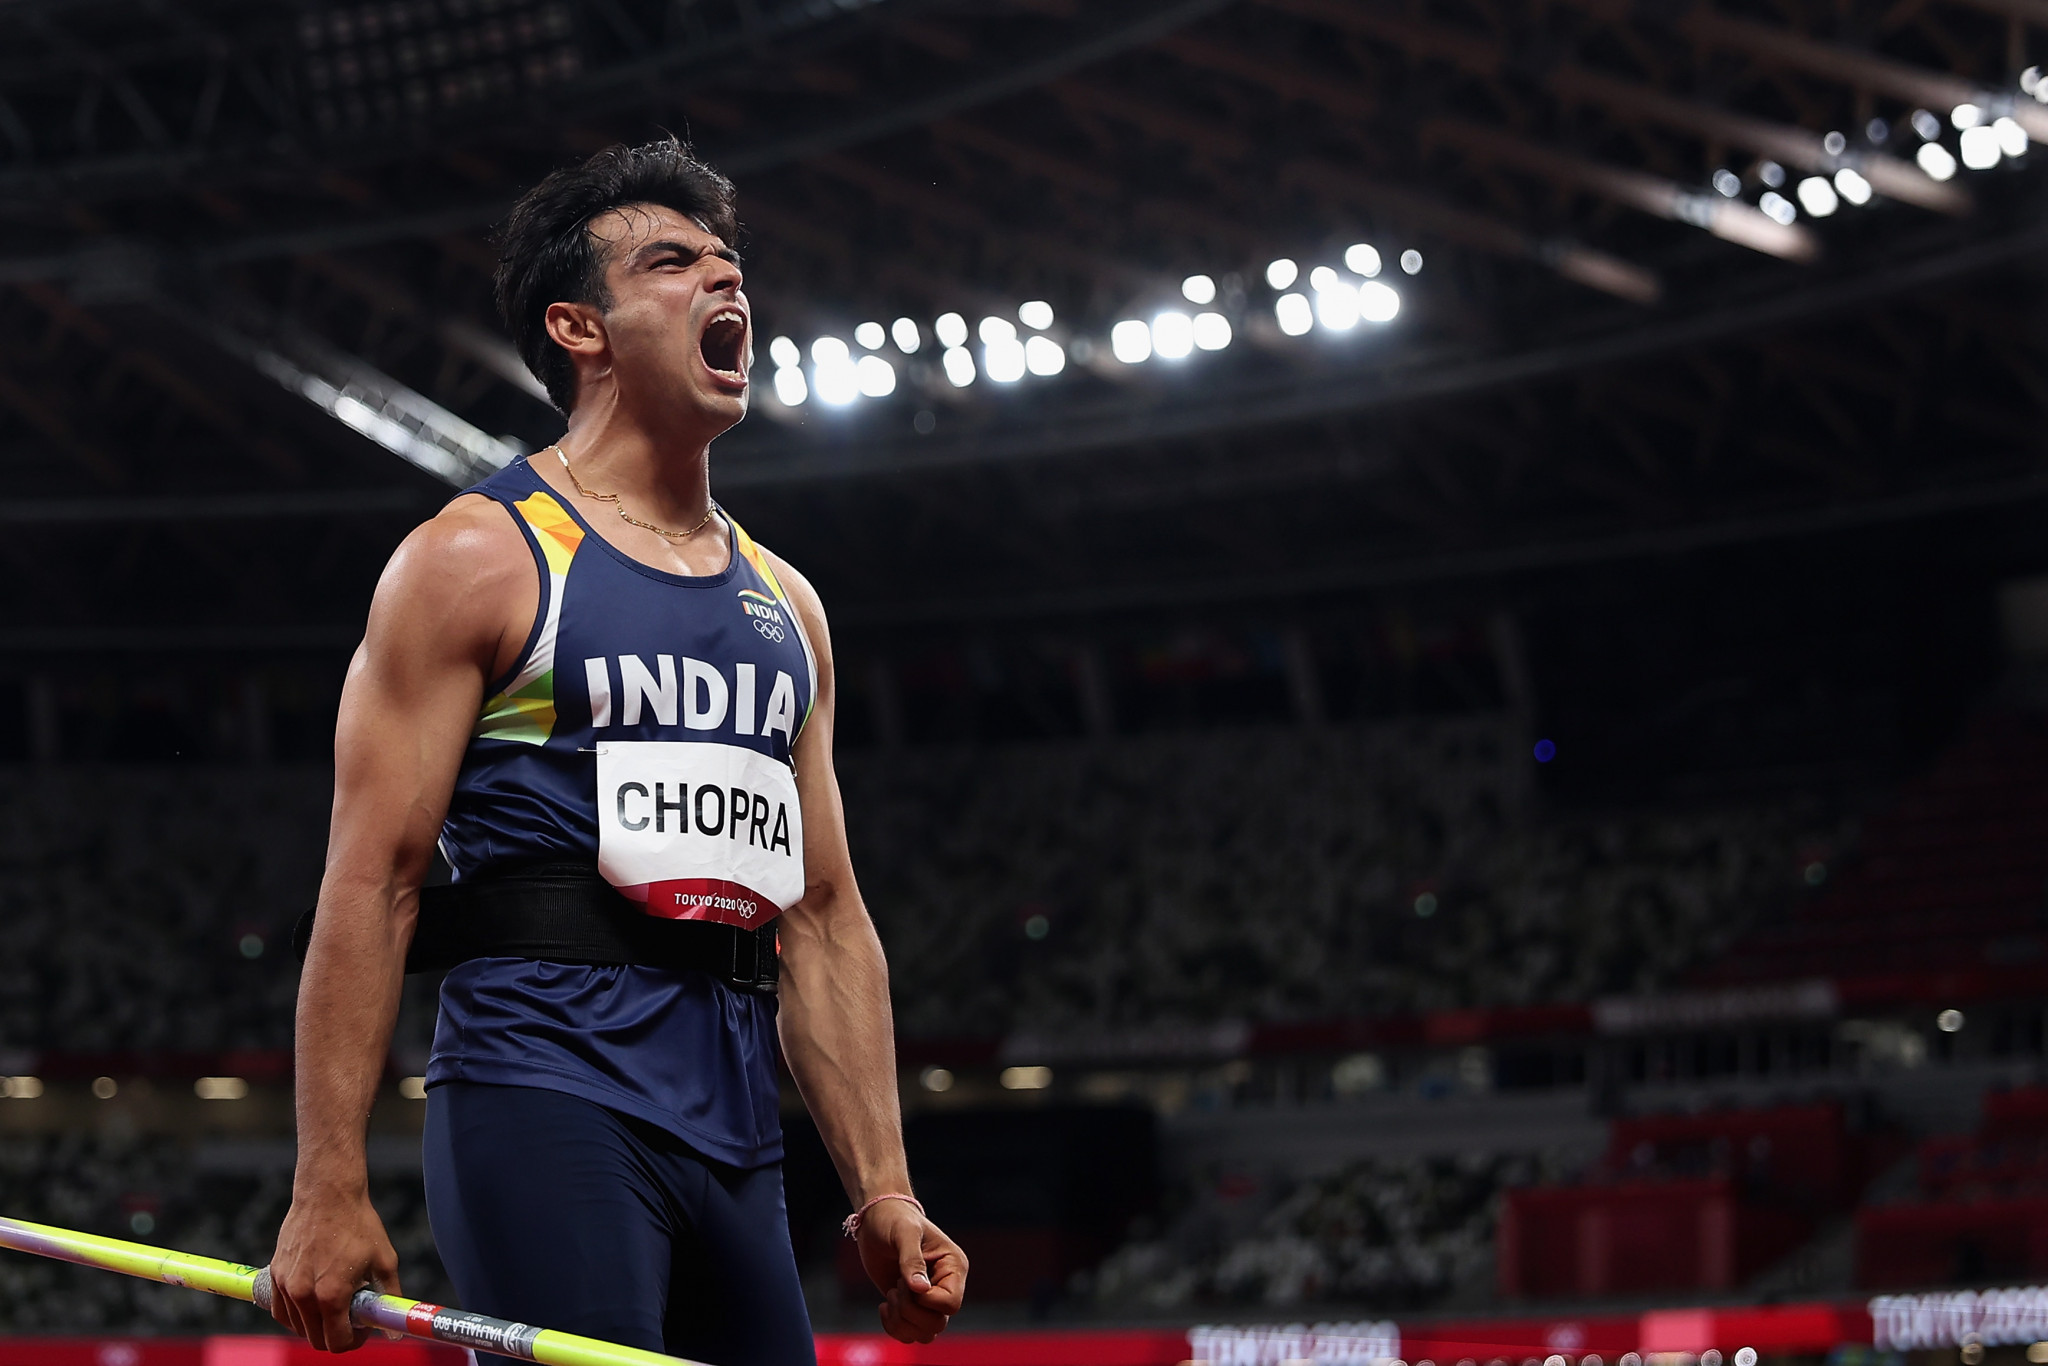 Neeraj Chopra is one of only two individual Olympic champions from India ©Getty Images